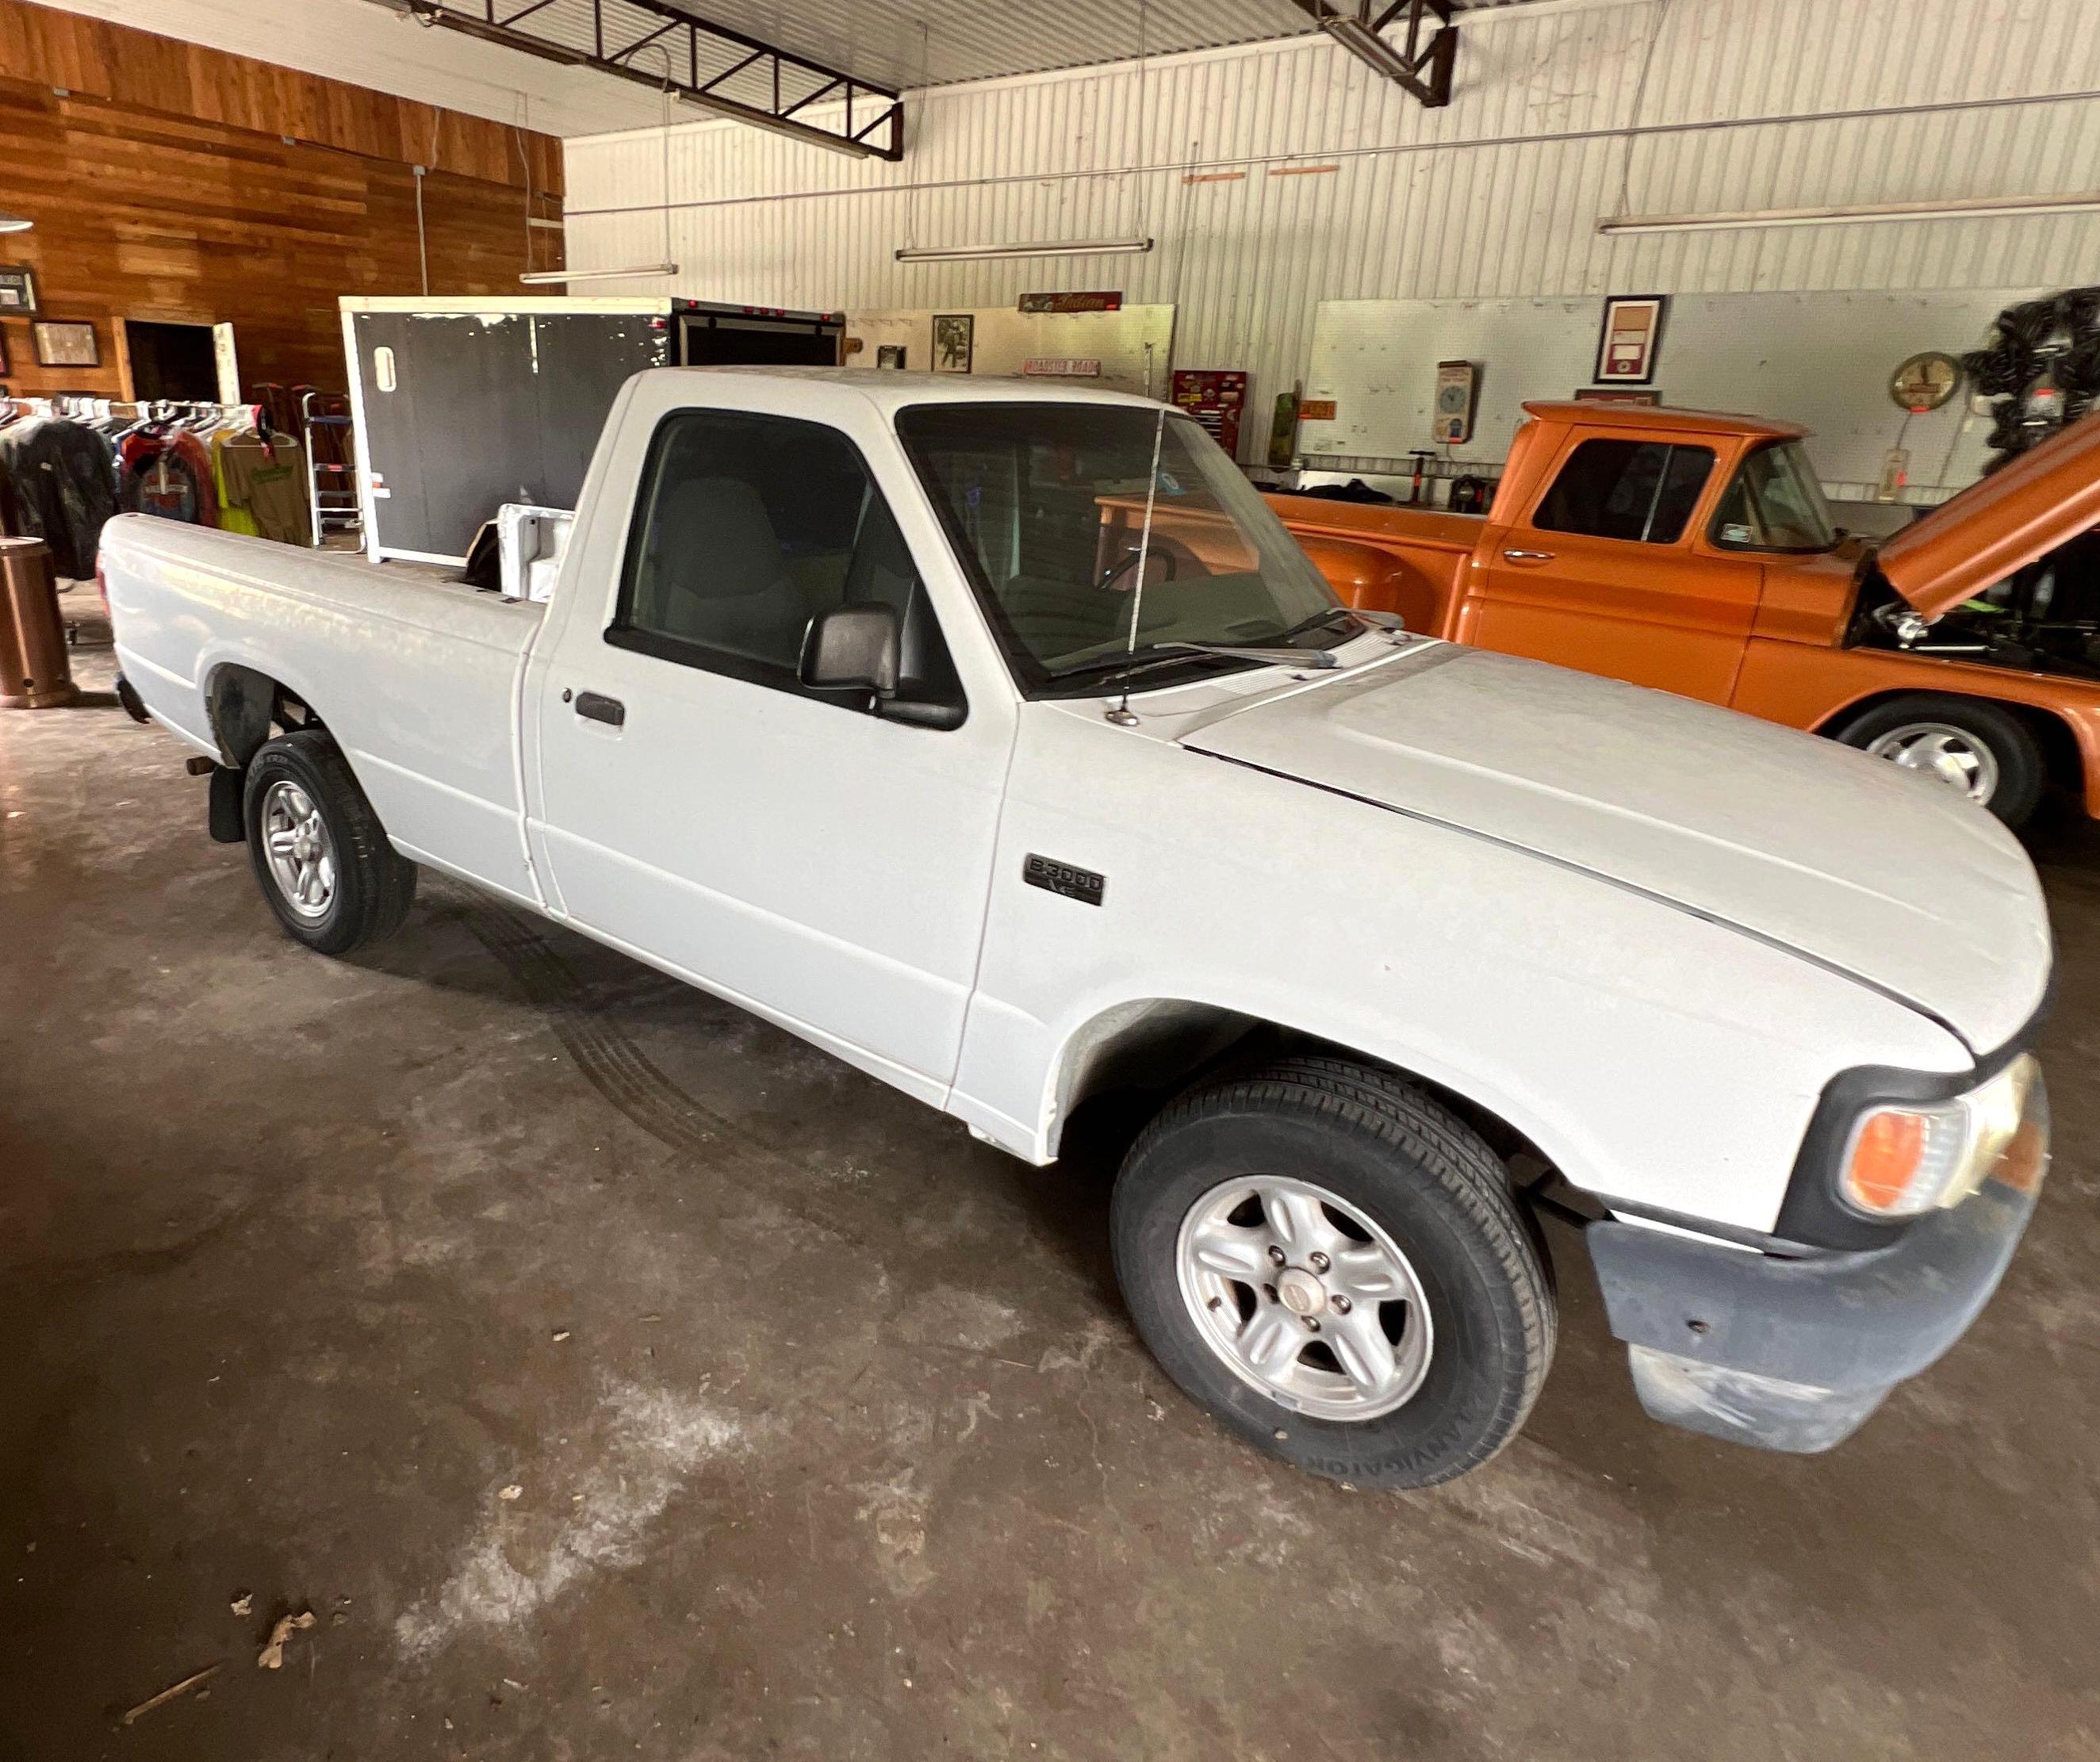 1994 Mazda B3000 Truck with Standard Transmission 258,411 miles - Runs and Drives